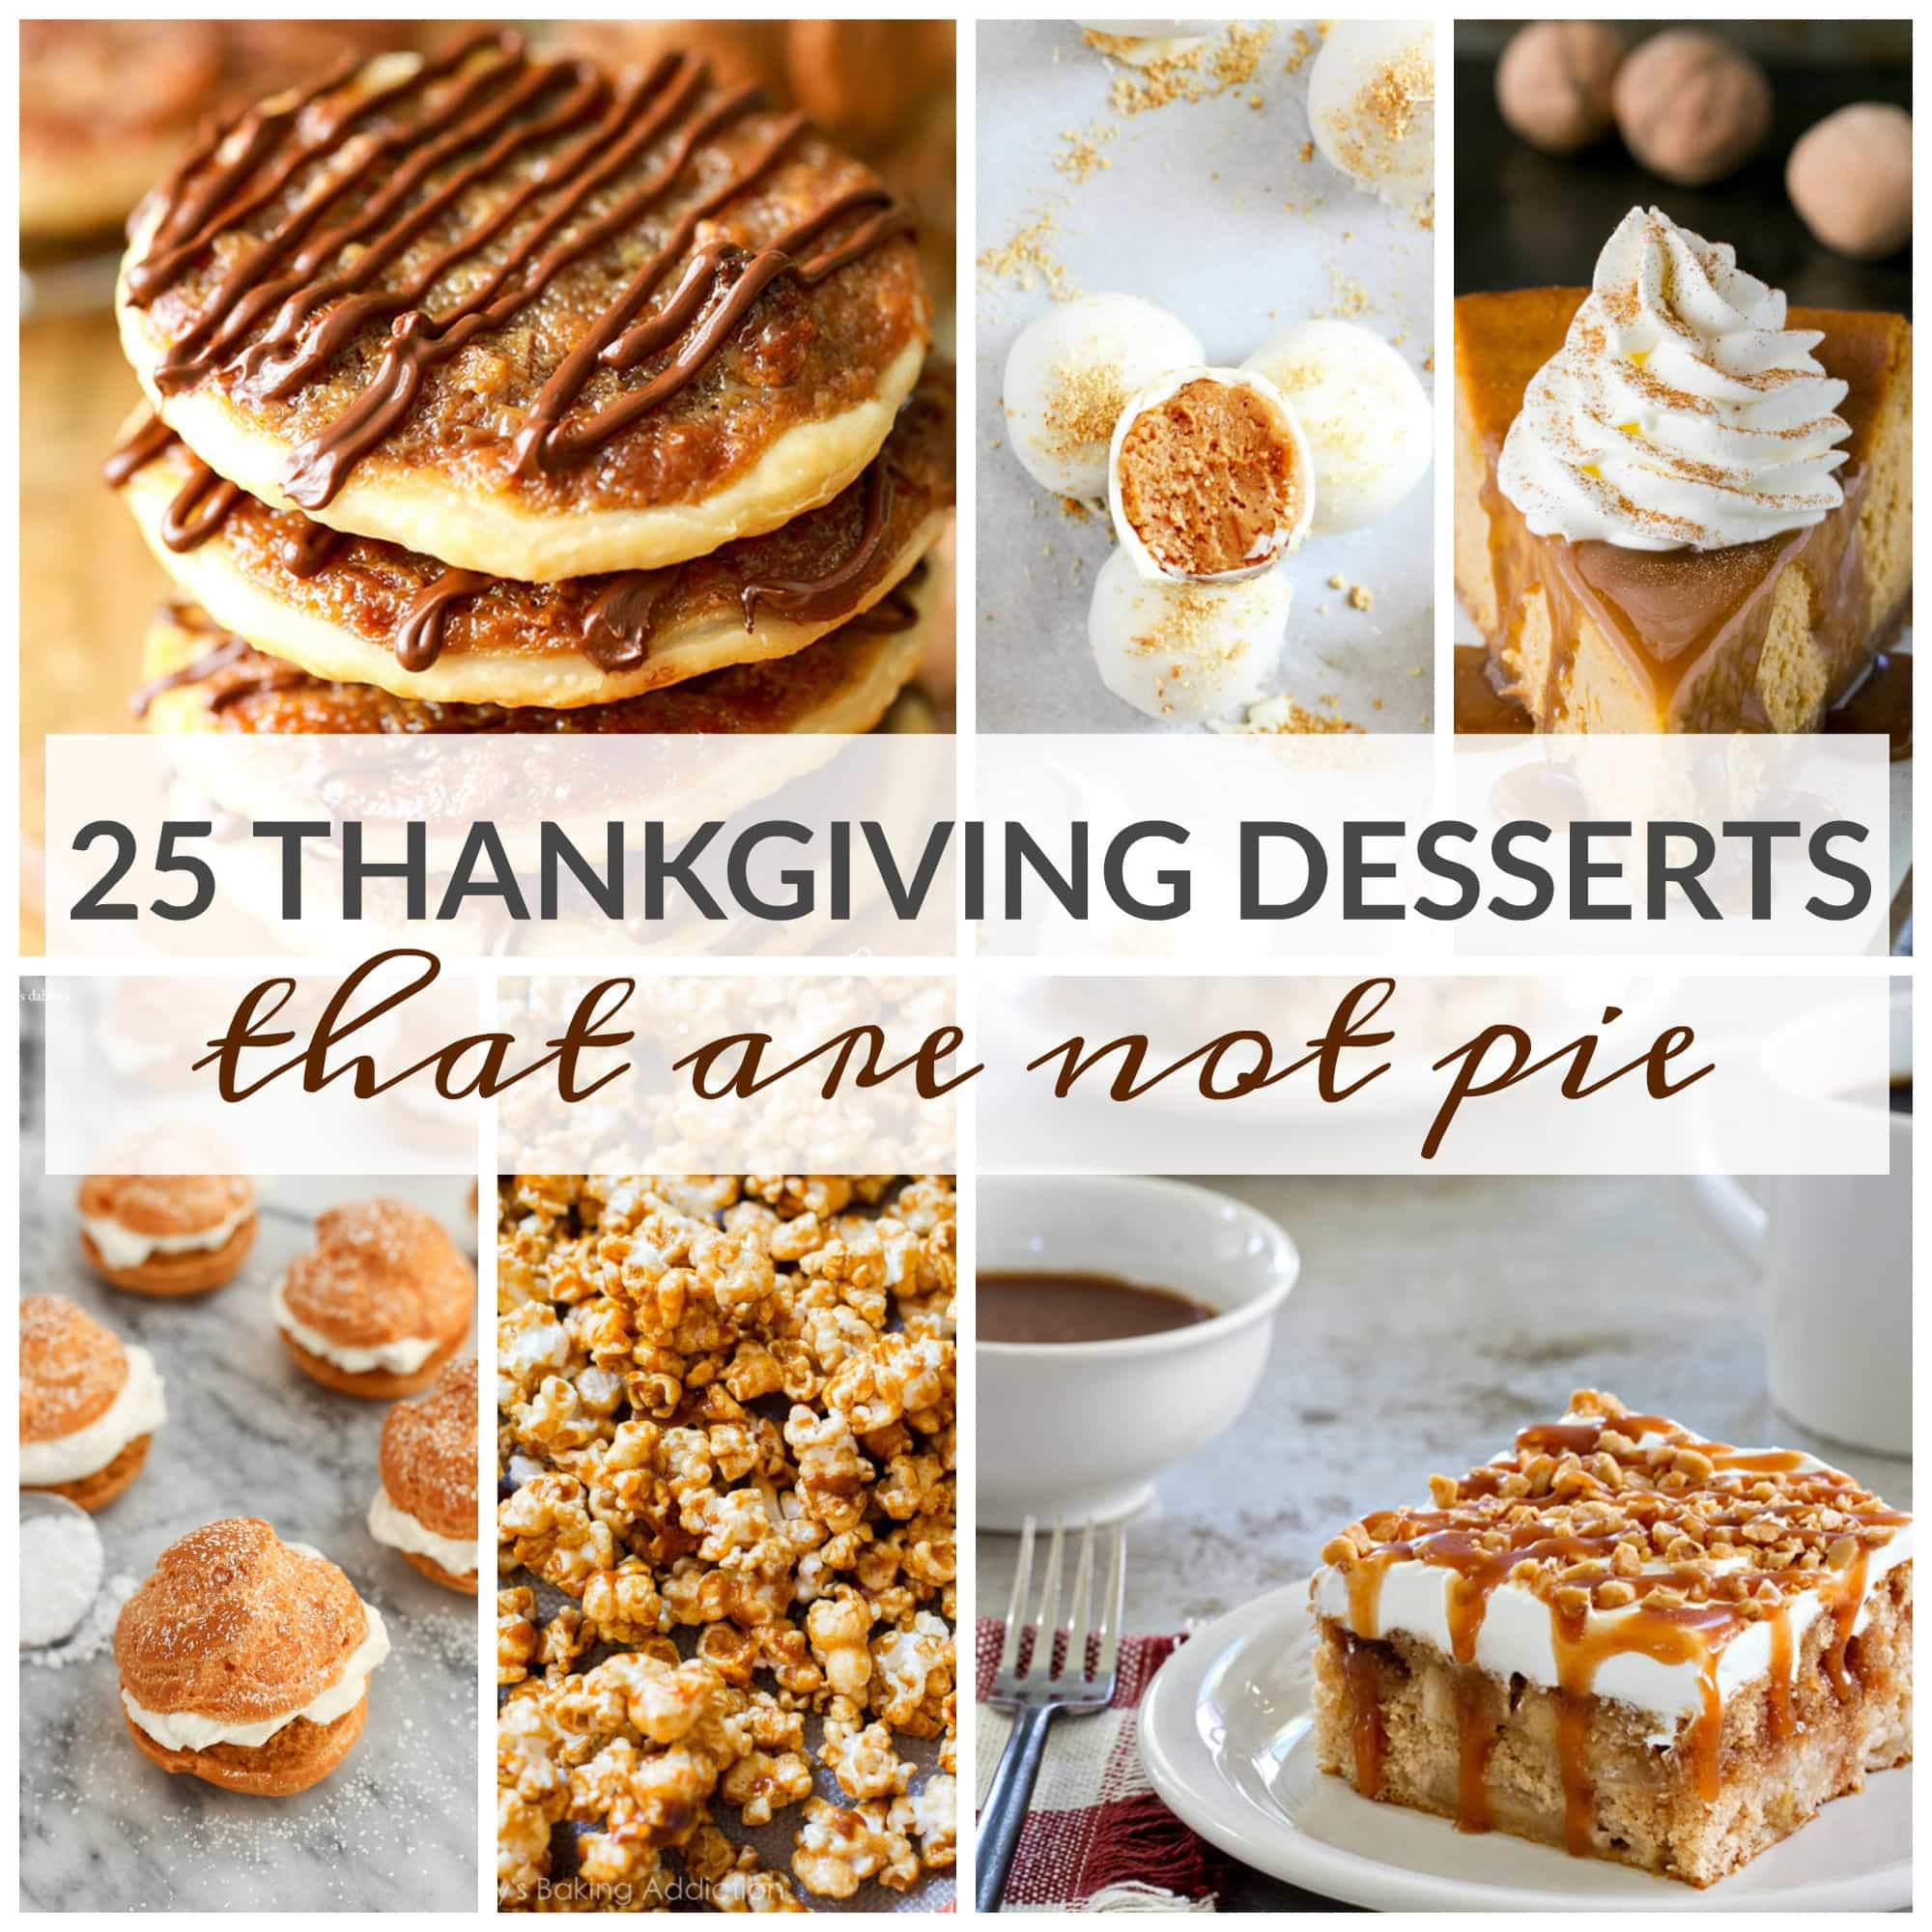 Holiday Desserts Thanksgiving
 25 Thanksgiving Desserts That Are Not Pie A Dash of Sanity